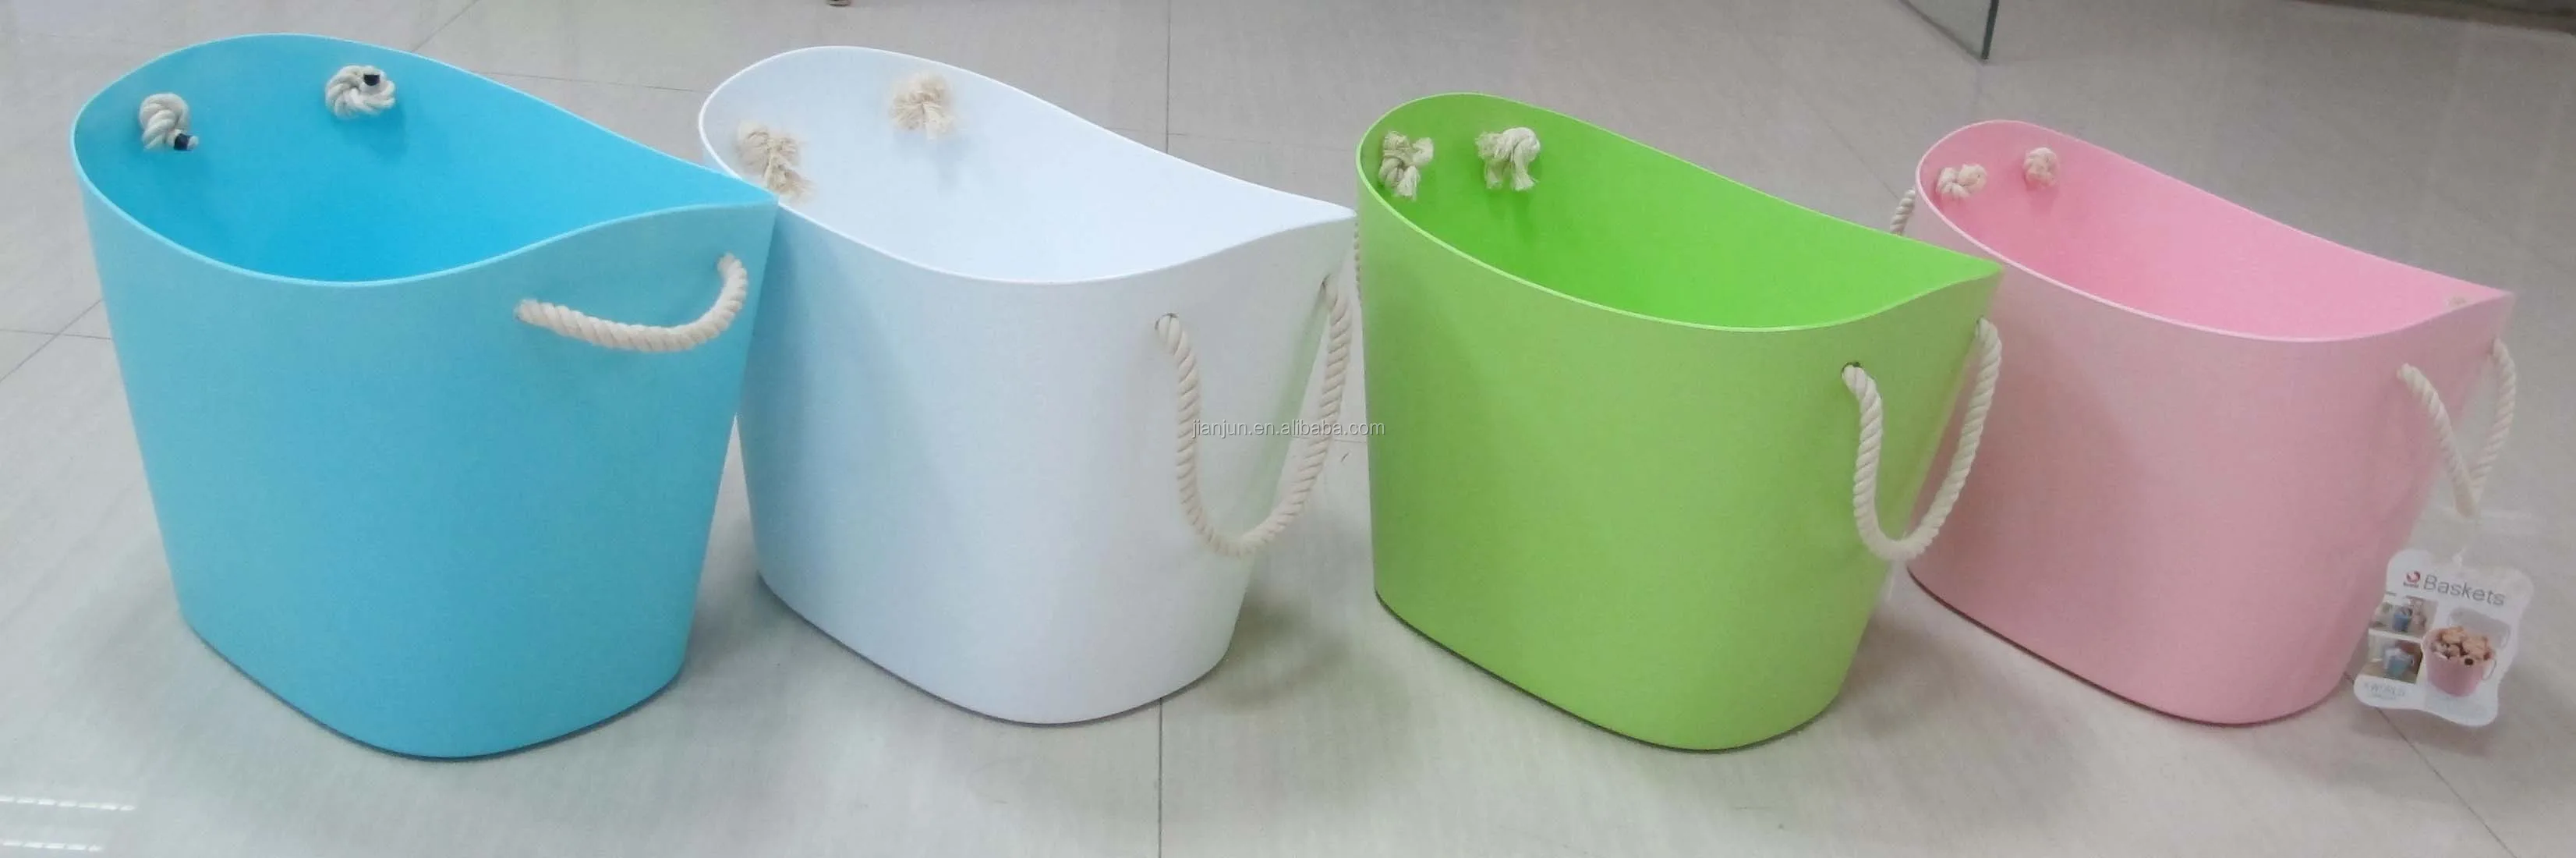 Sell Well Decorative Plastic Bucket Dirty Clothes Bucket Clothes ...